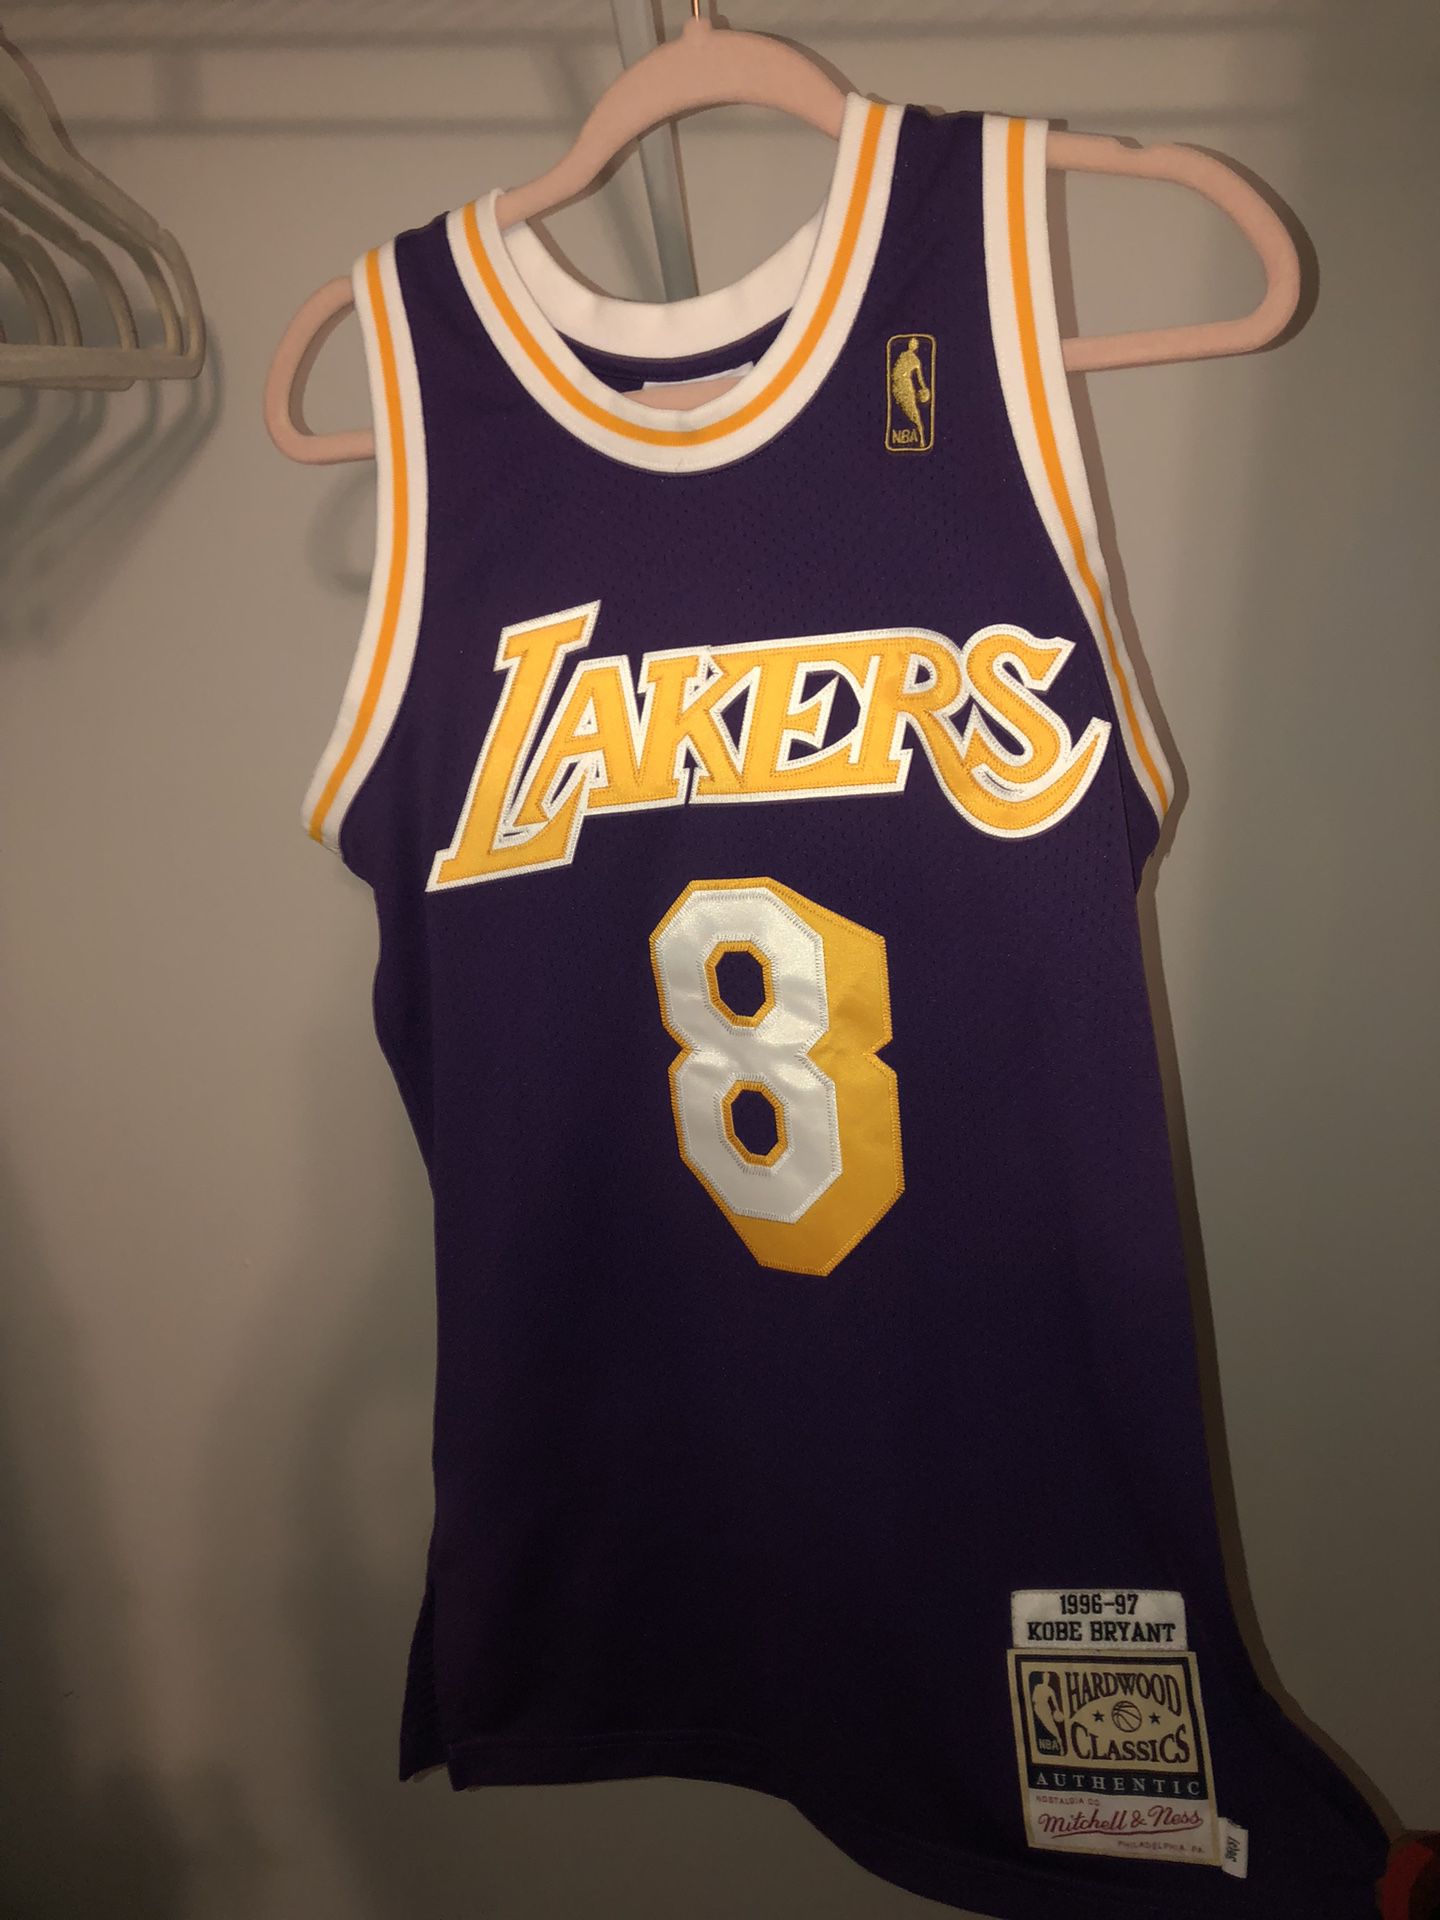 Authentic Kobe Bryant Lakers Jersey (Size 36S)